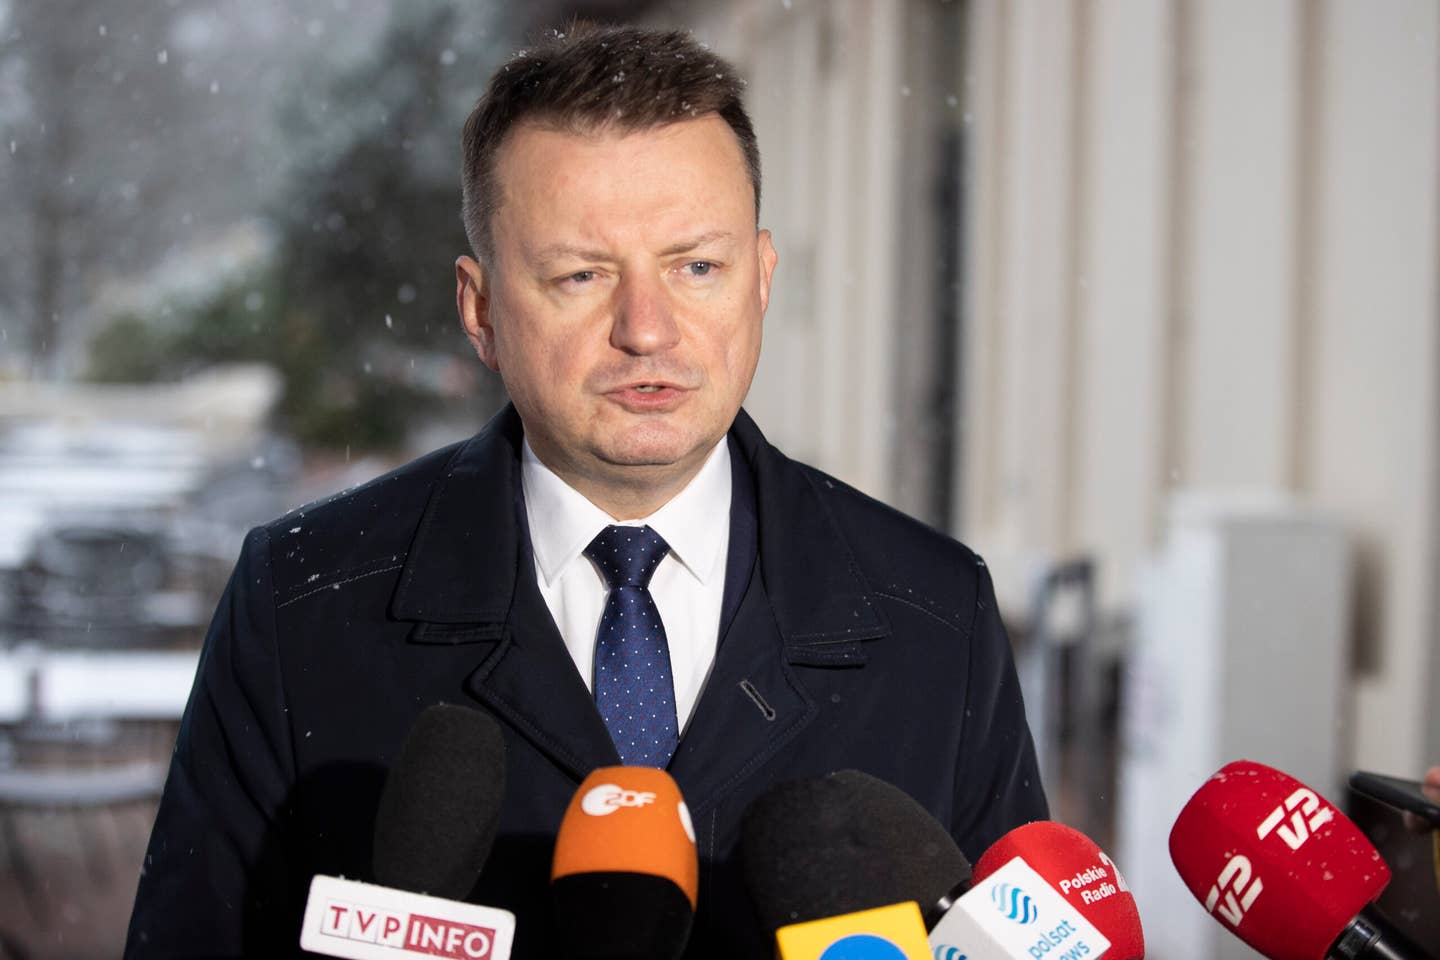 Secretary of Defense Mariusz Blaszczak of Poland gives a press briefing in January. <em>Credit: Photo by Marco Steinbrenner/DeFodi Images via Getty Images</em>